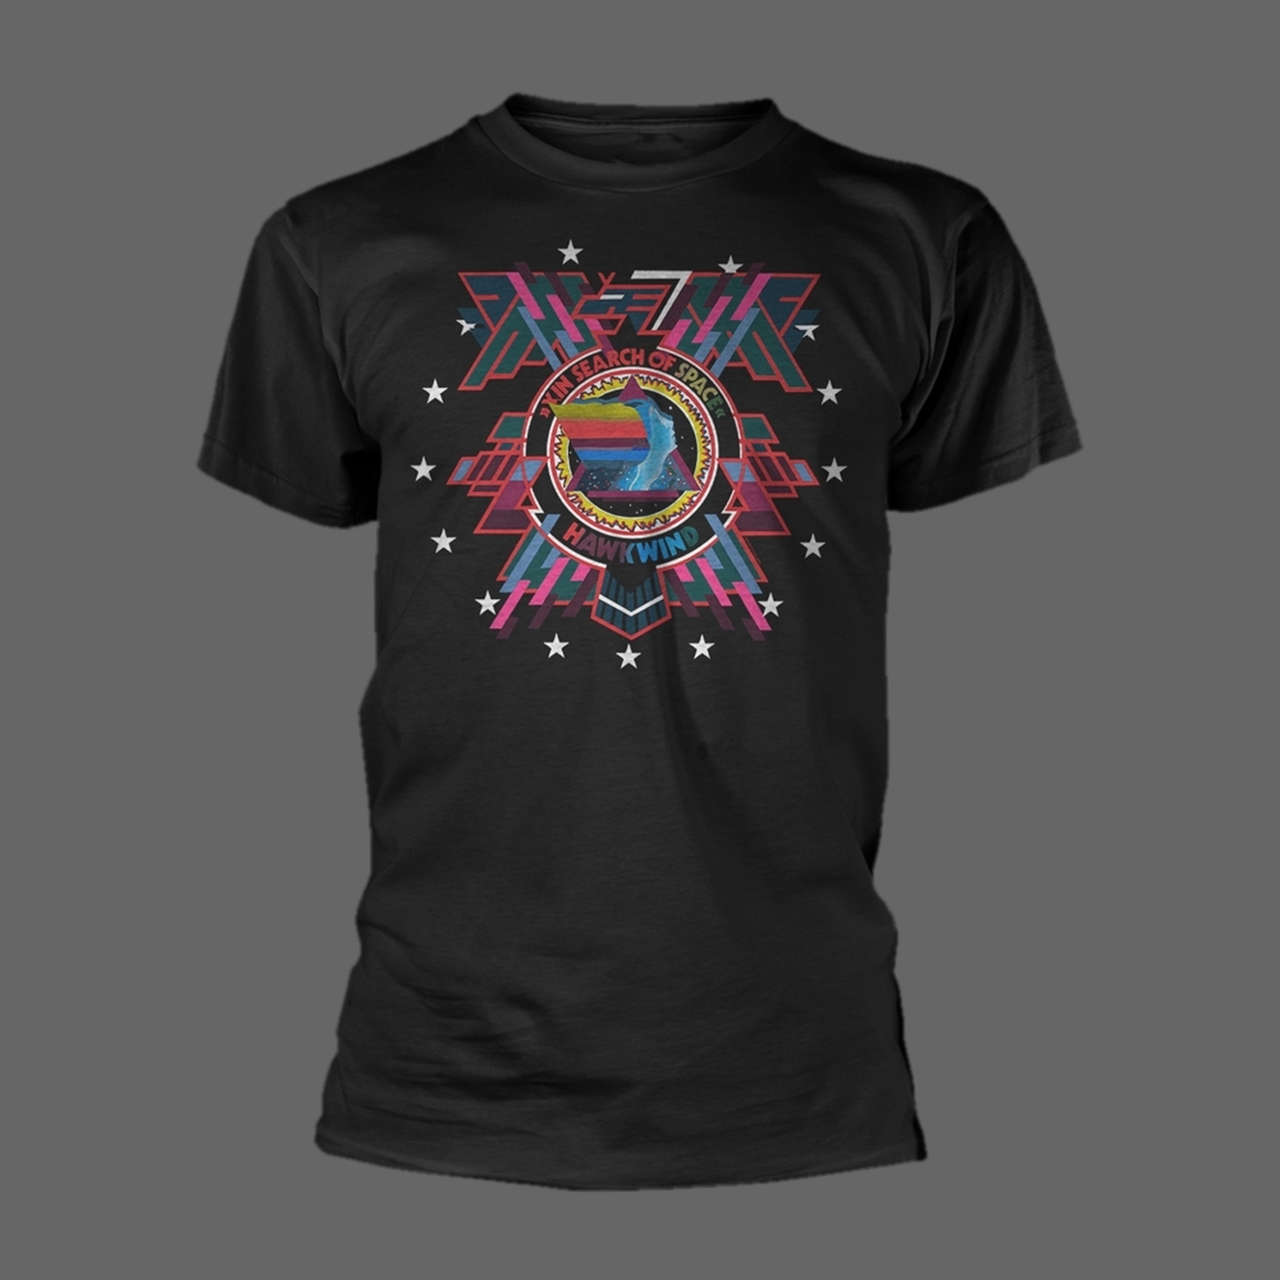 Hawkwind - In Search of Space (T-Shirt)